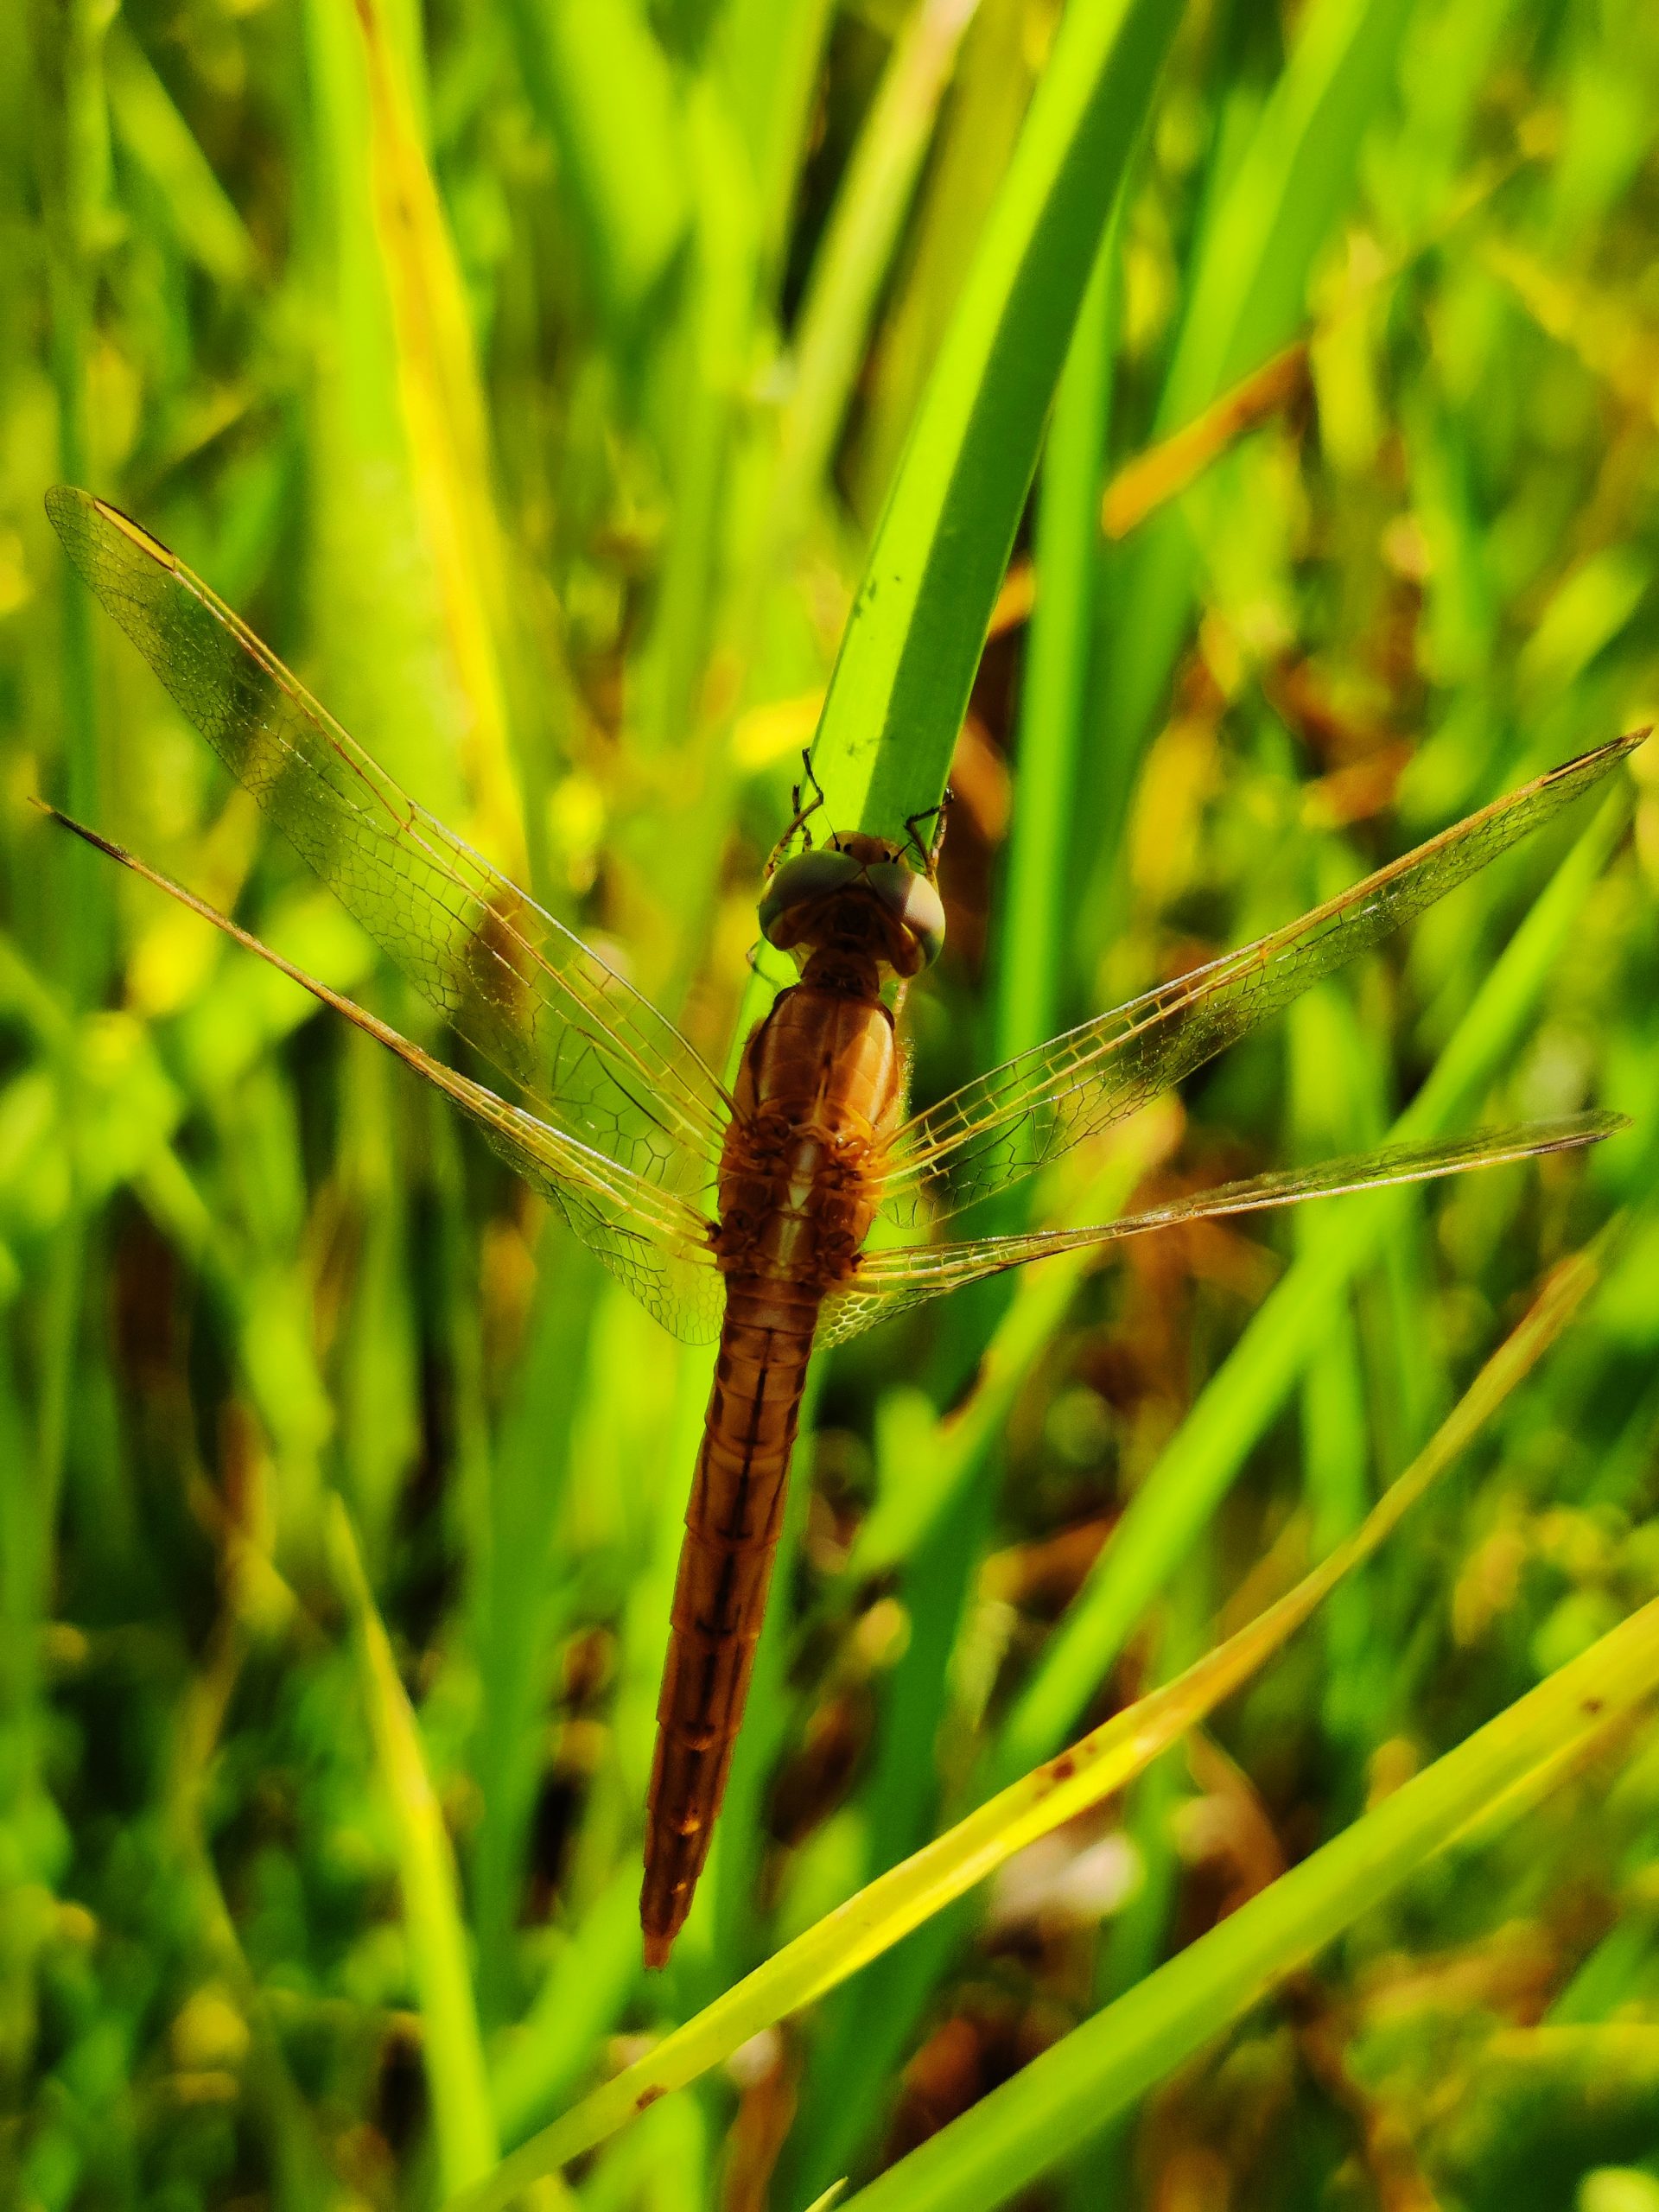 Dragonfly on the crop